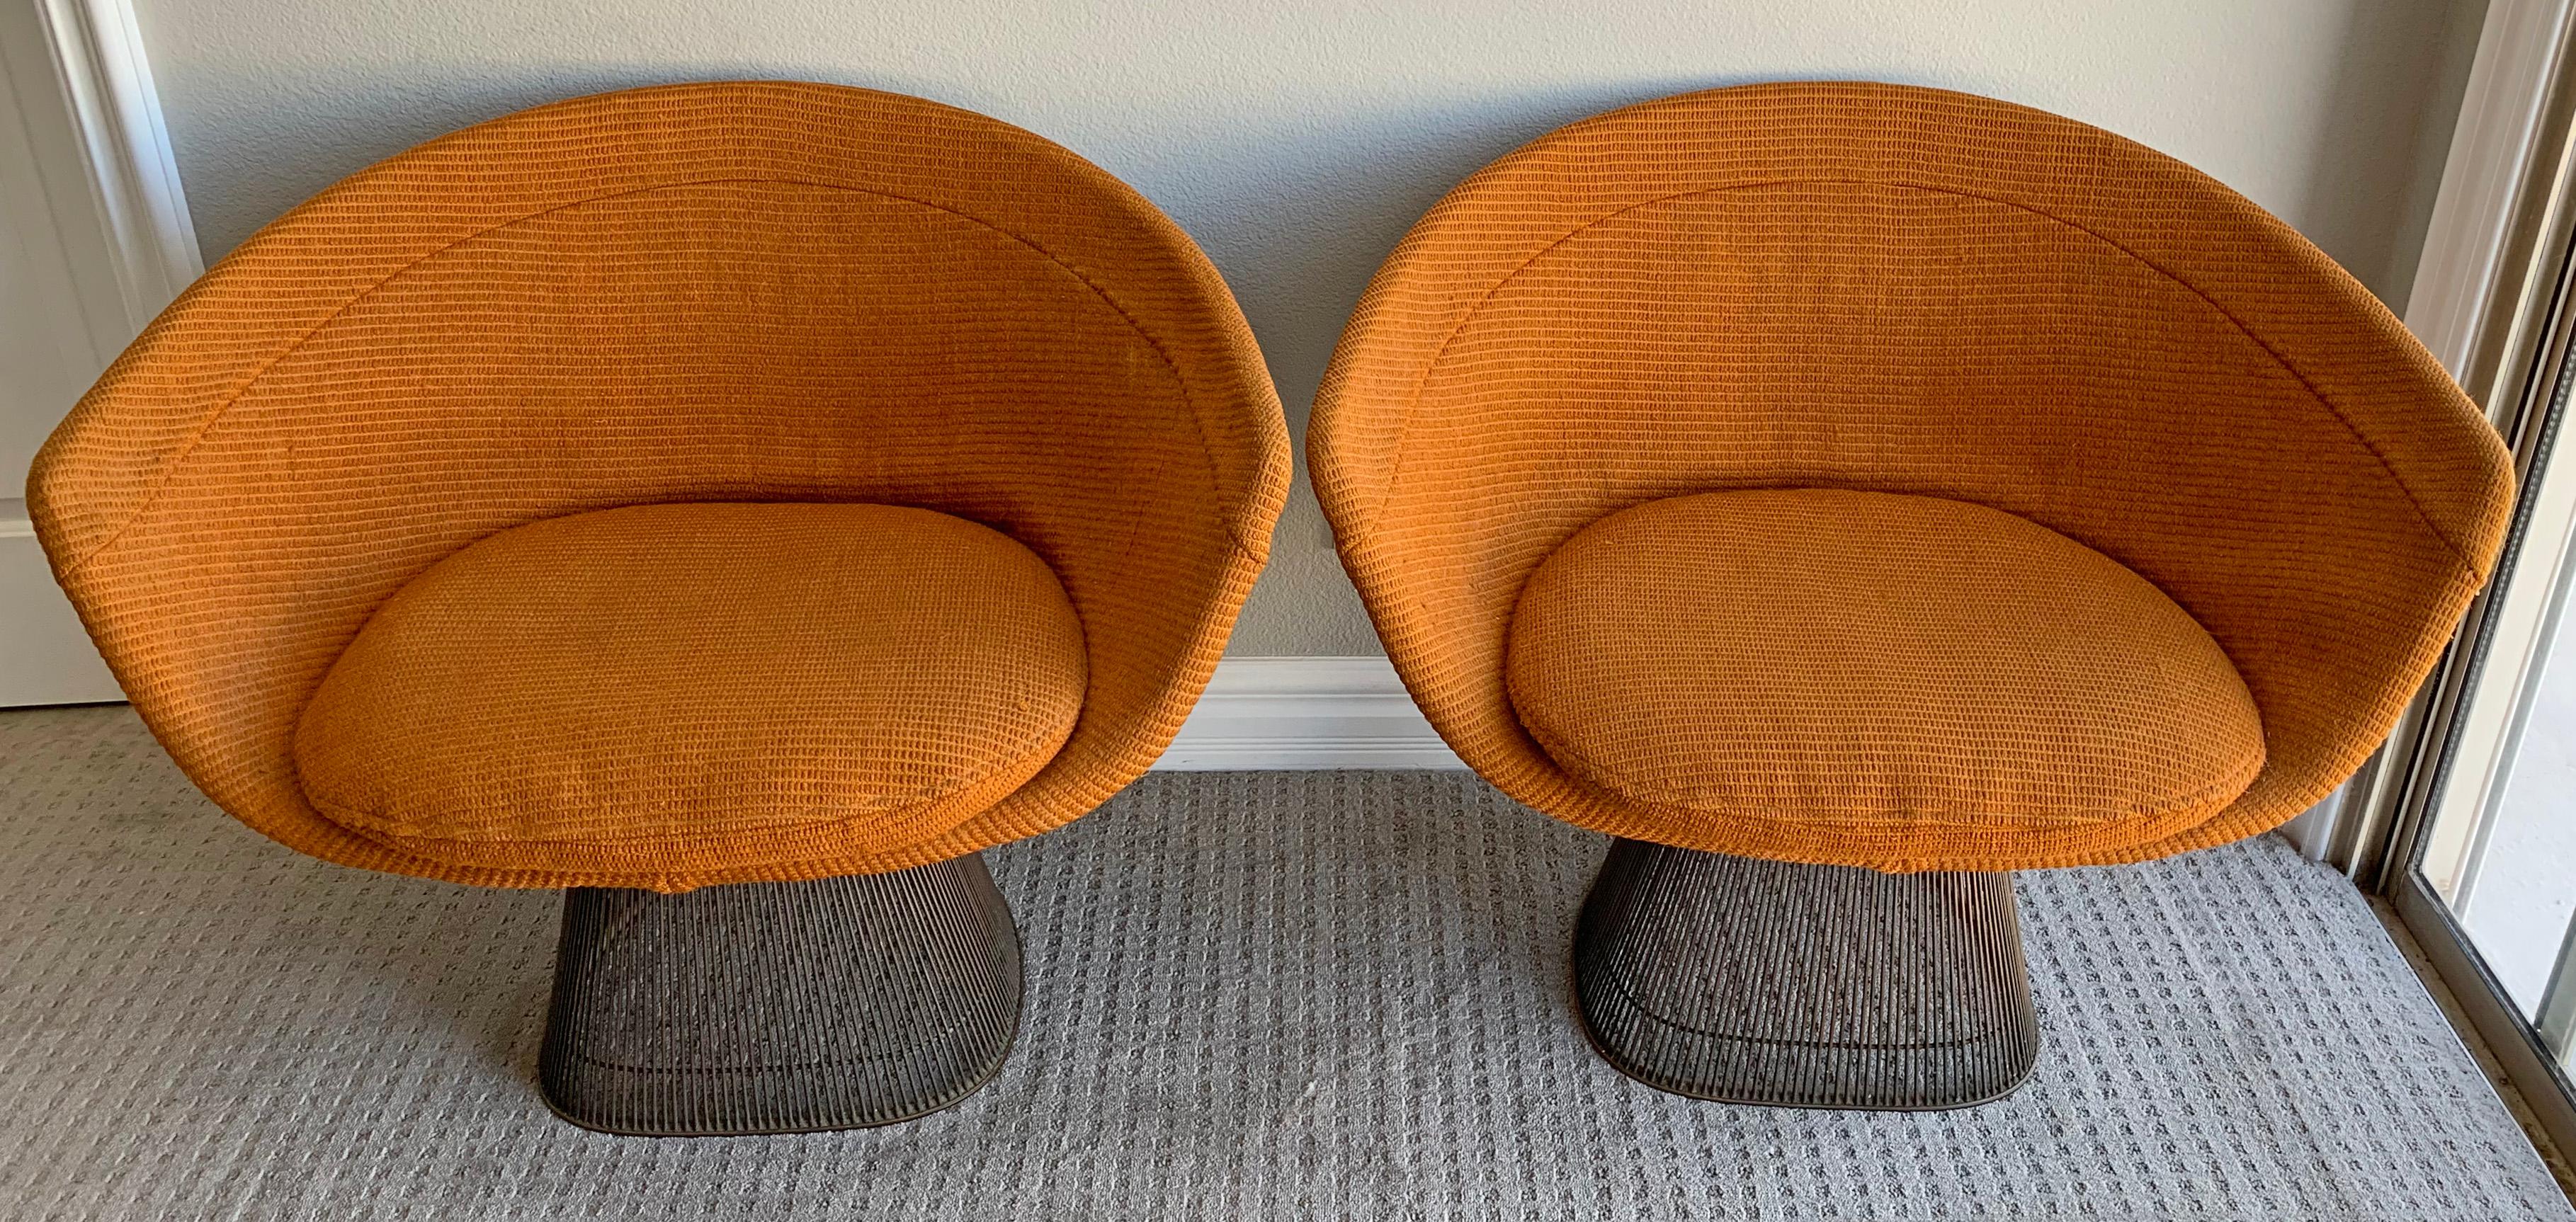 An absolutely wonderful pair of Warren Platner bronze lounge chairs. These early lounge chairs feature their original orange nubby upholstery, original tags (on both chairs) and original stickers that read 